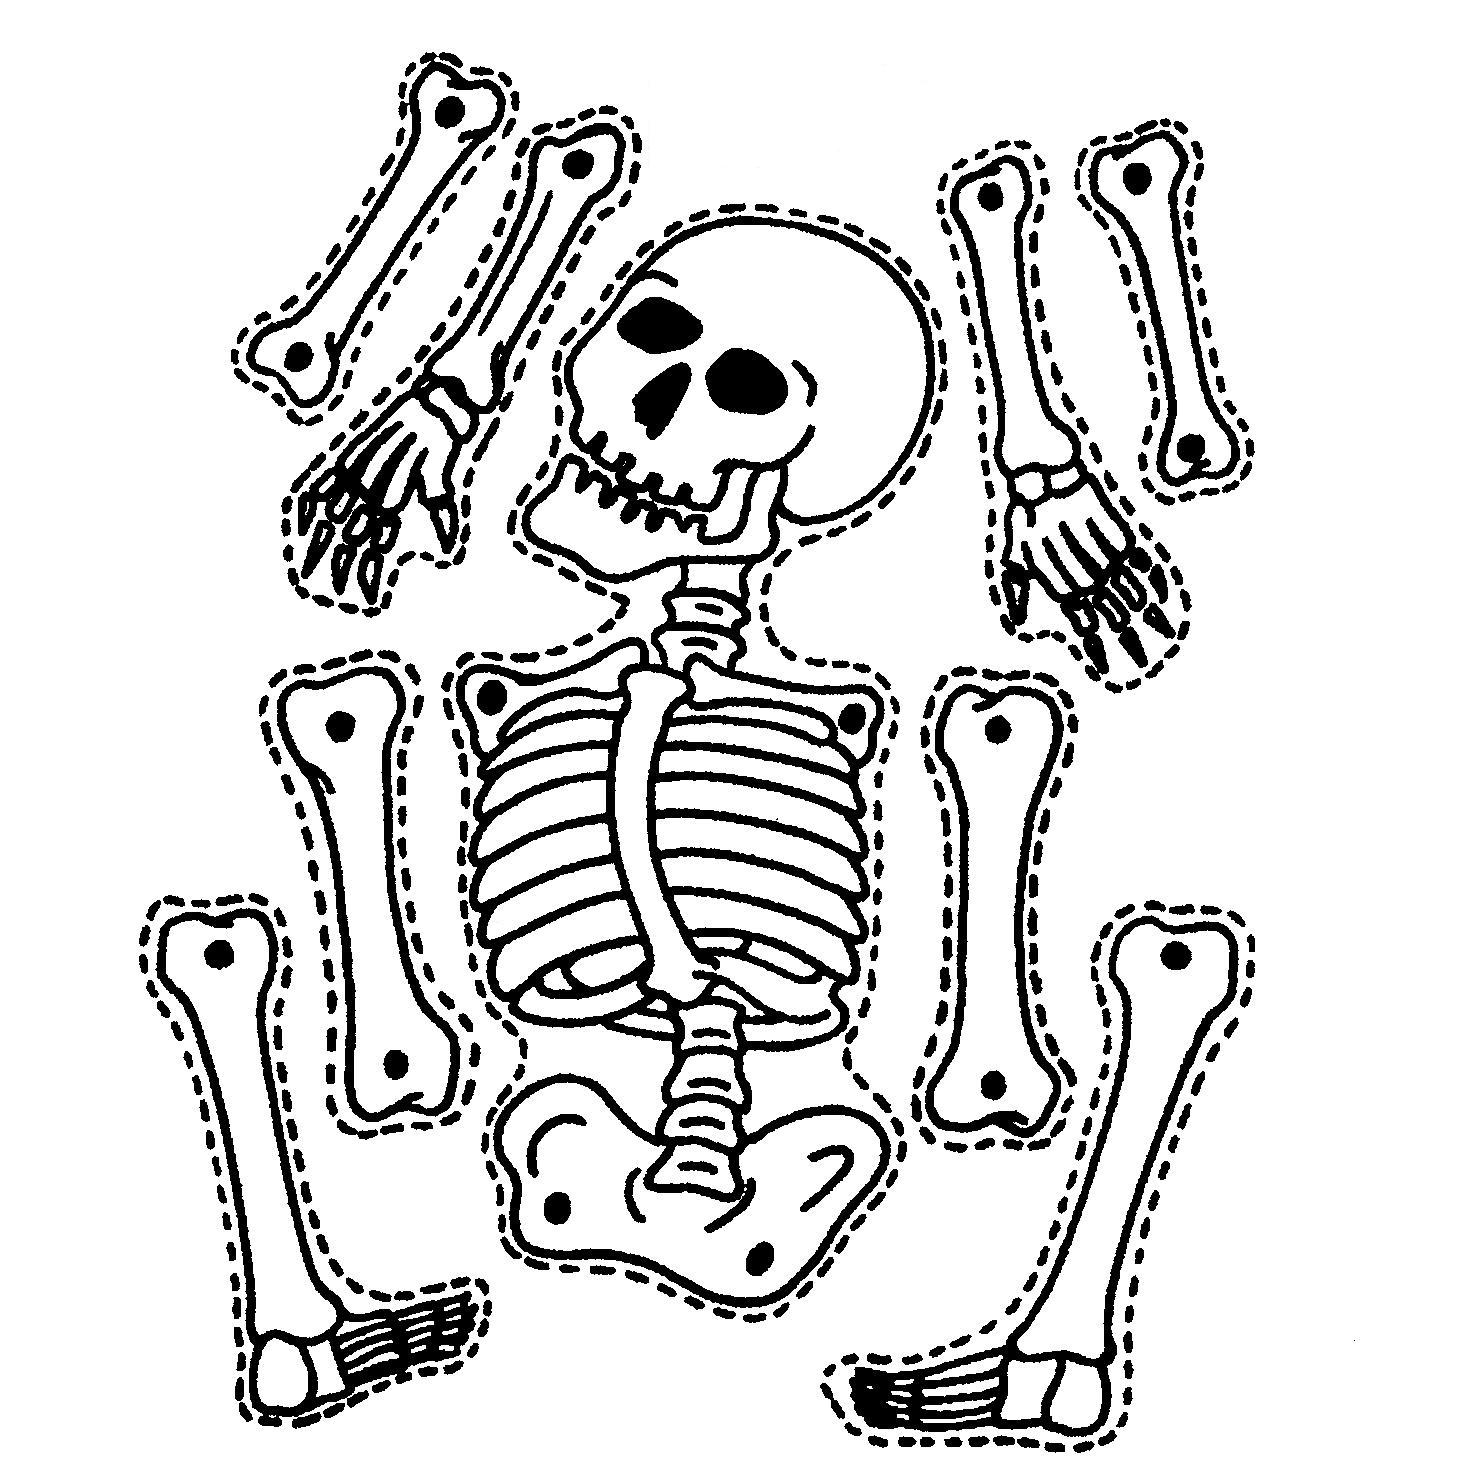 Printable Skeleton Template Cut Out - ClipArt Best